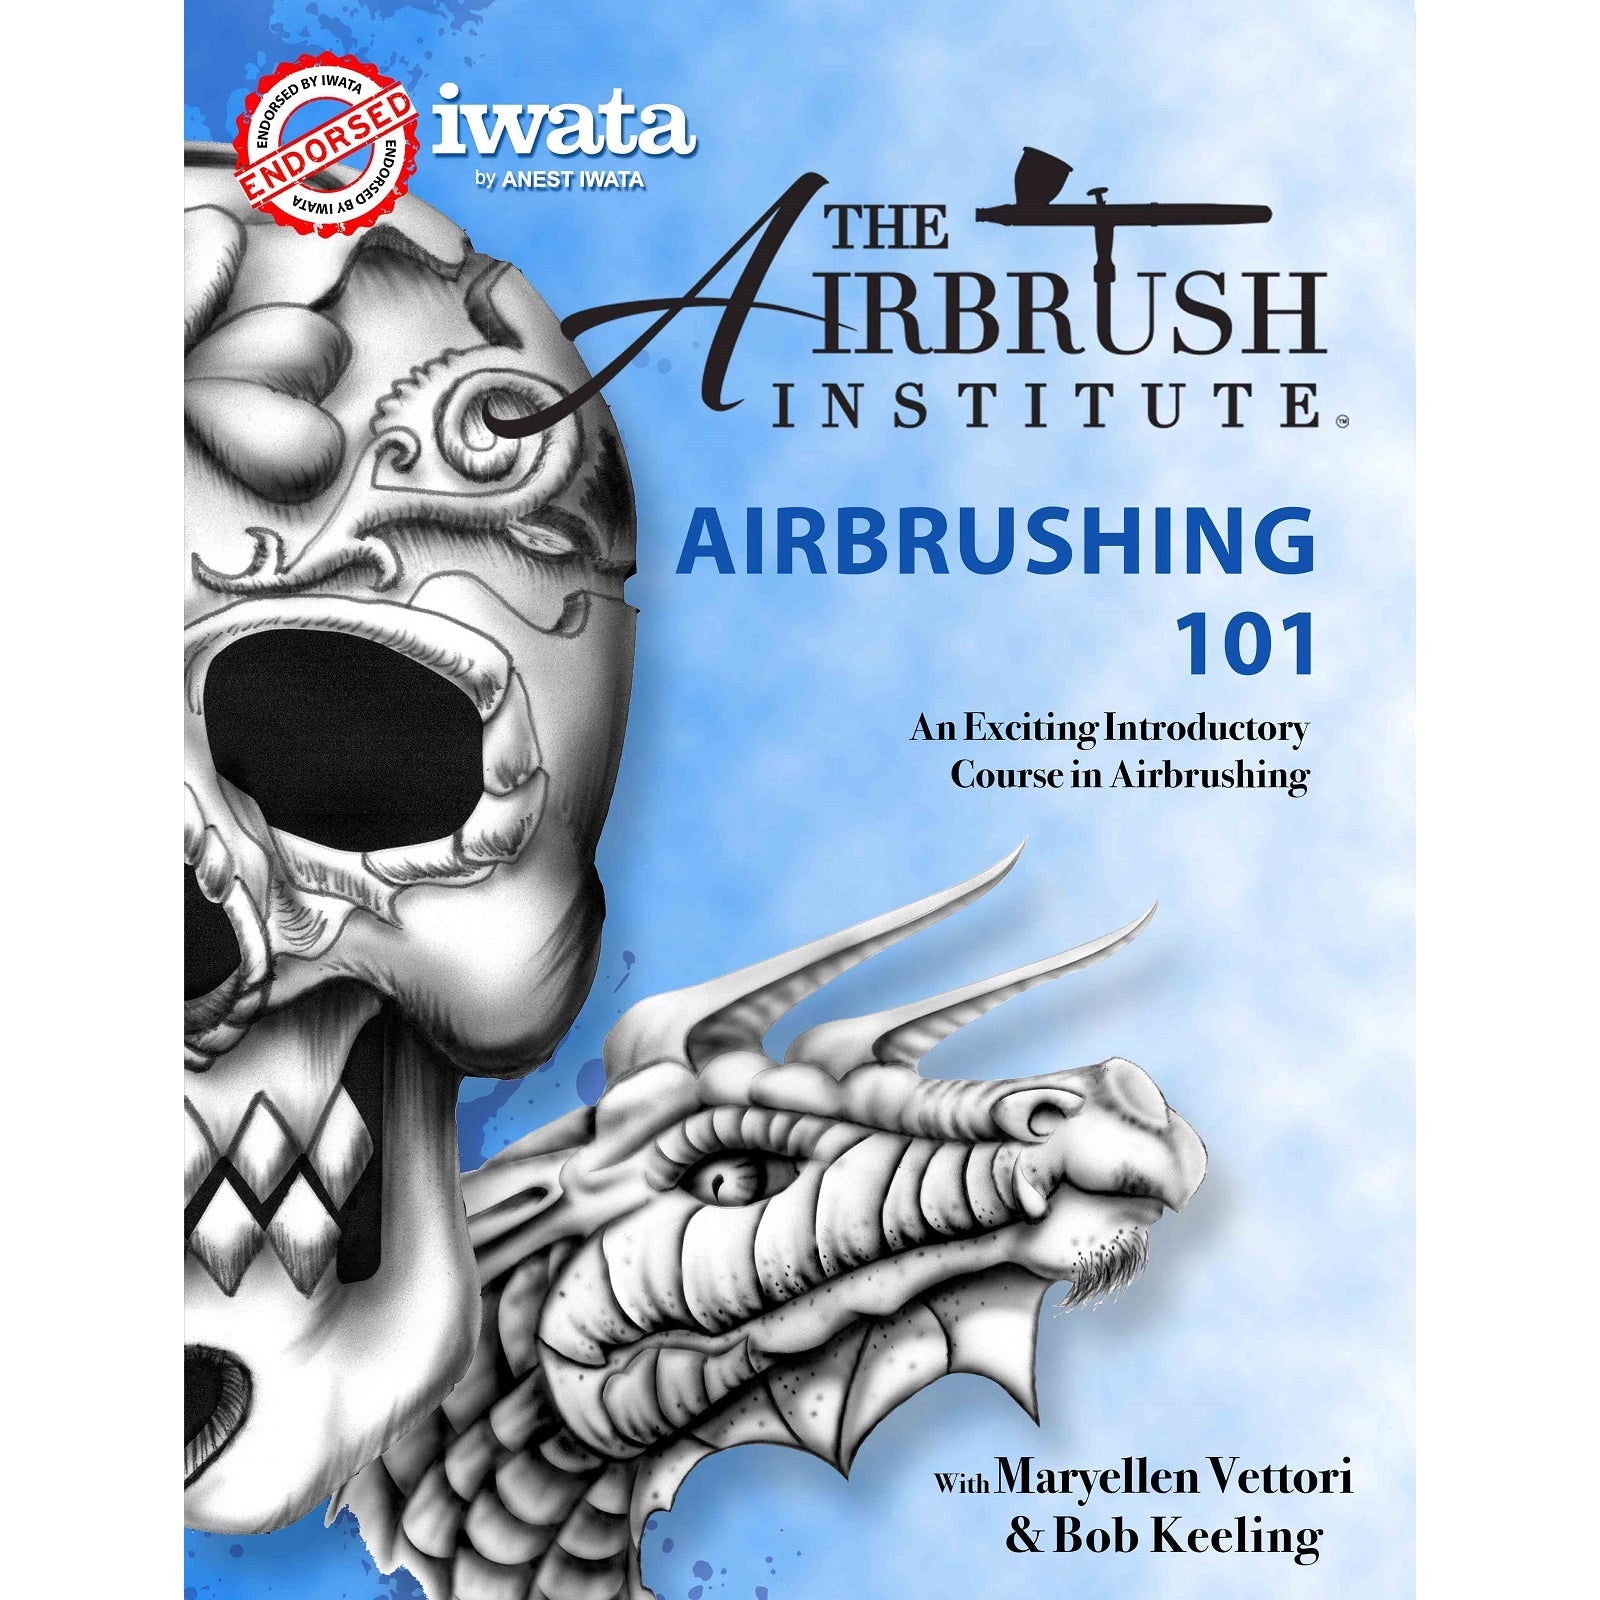 "Airbrushing 101" by The Airbrush Institute™ Book